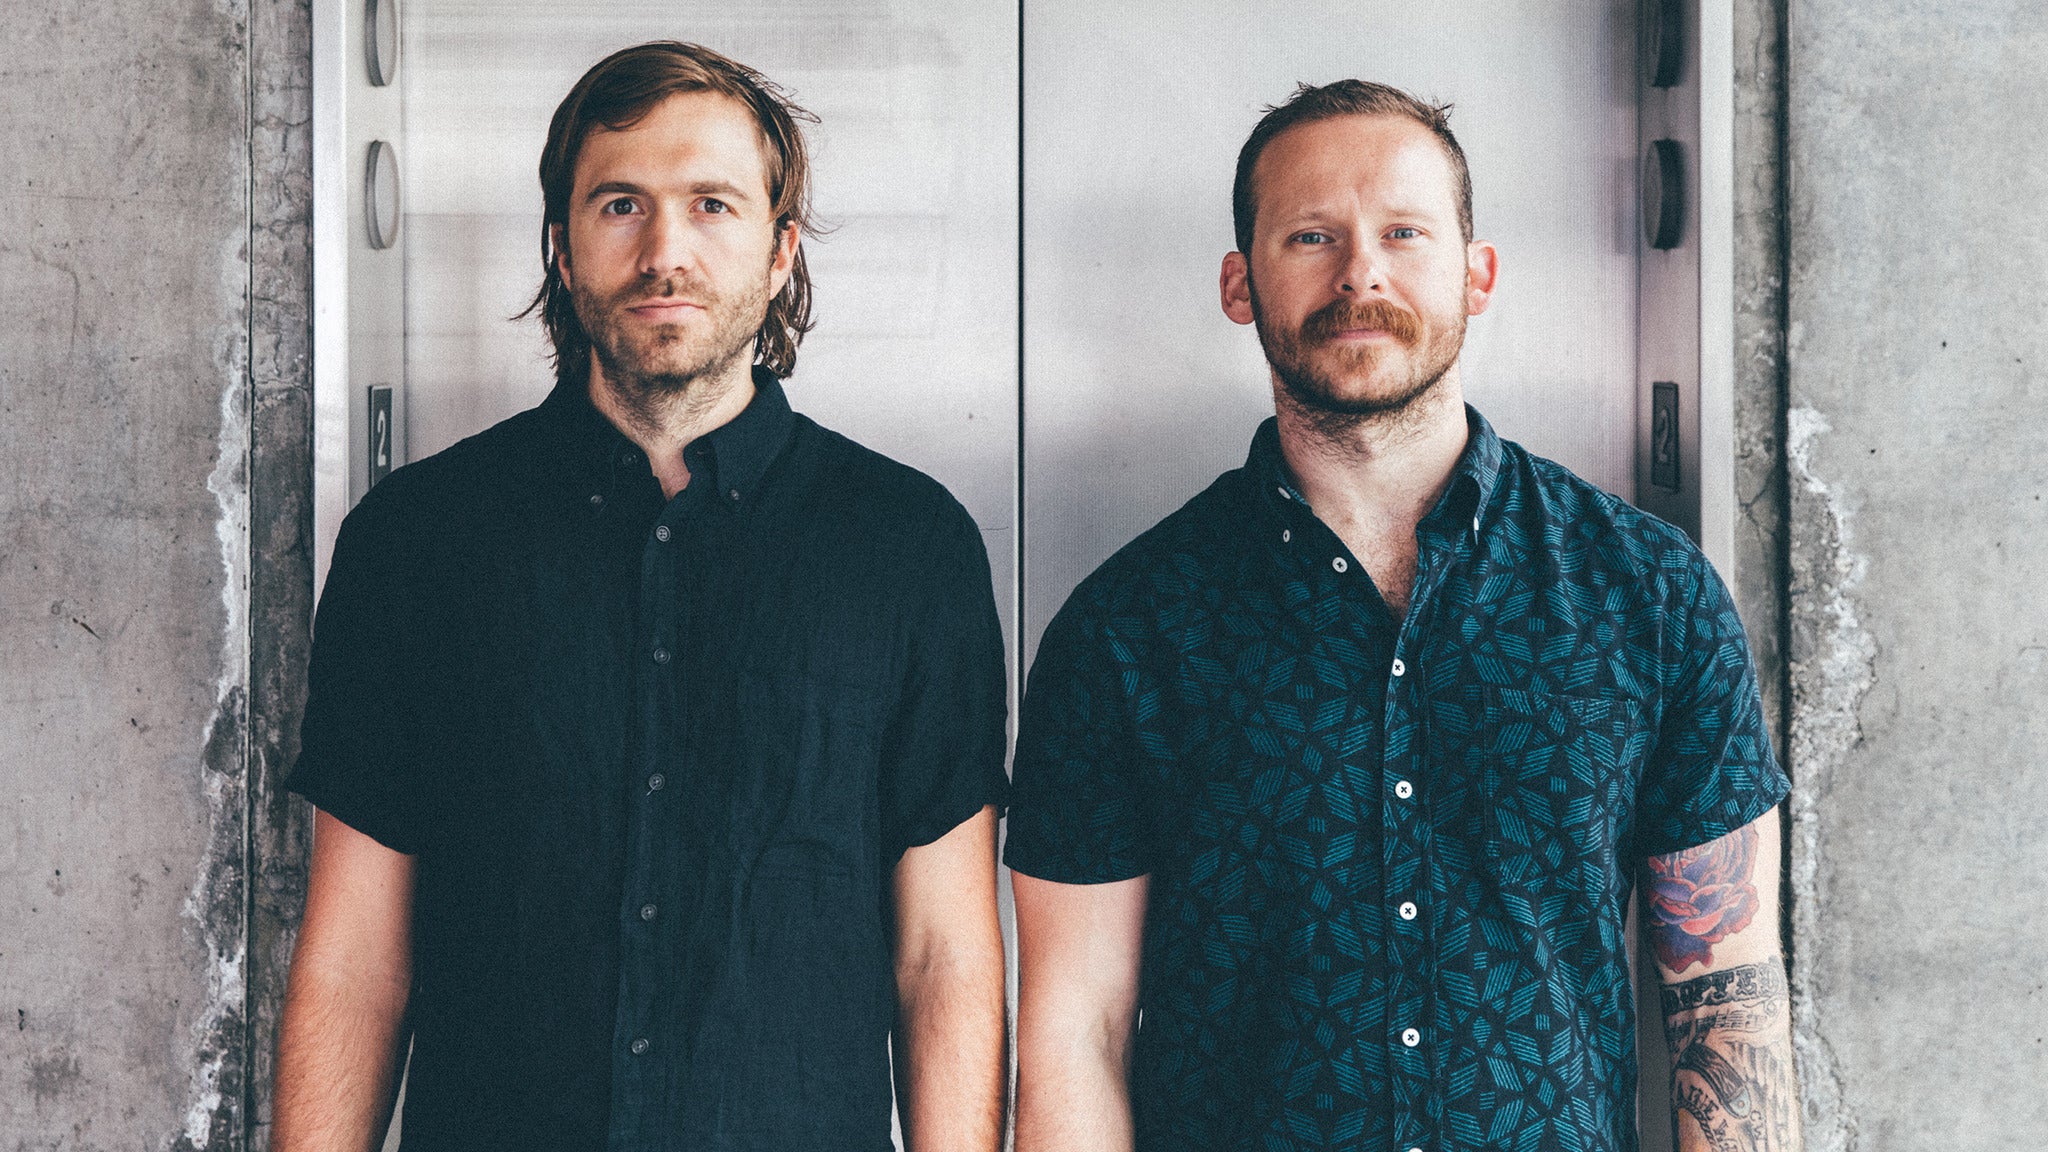 Penny & Sparrow in Chattanooga promo photo for Official Platinum presale offer code